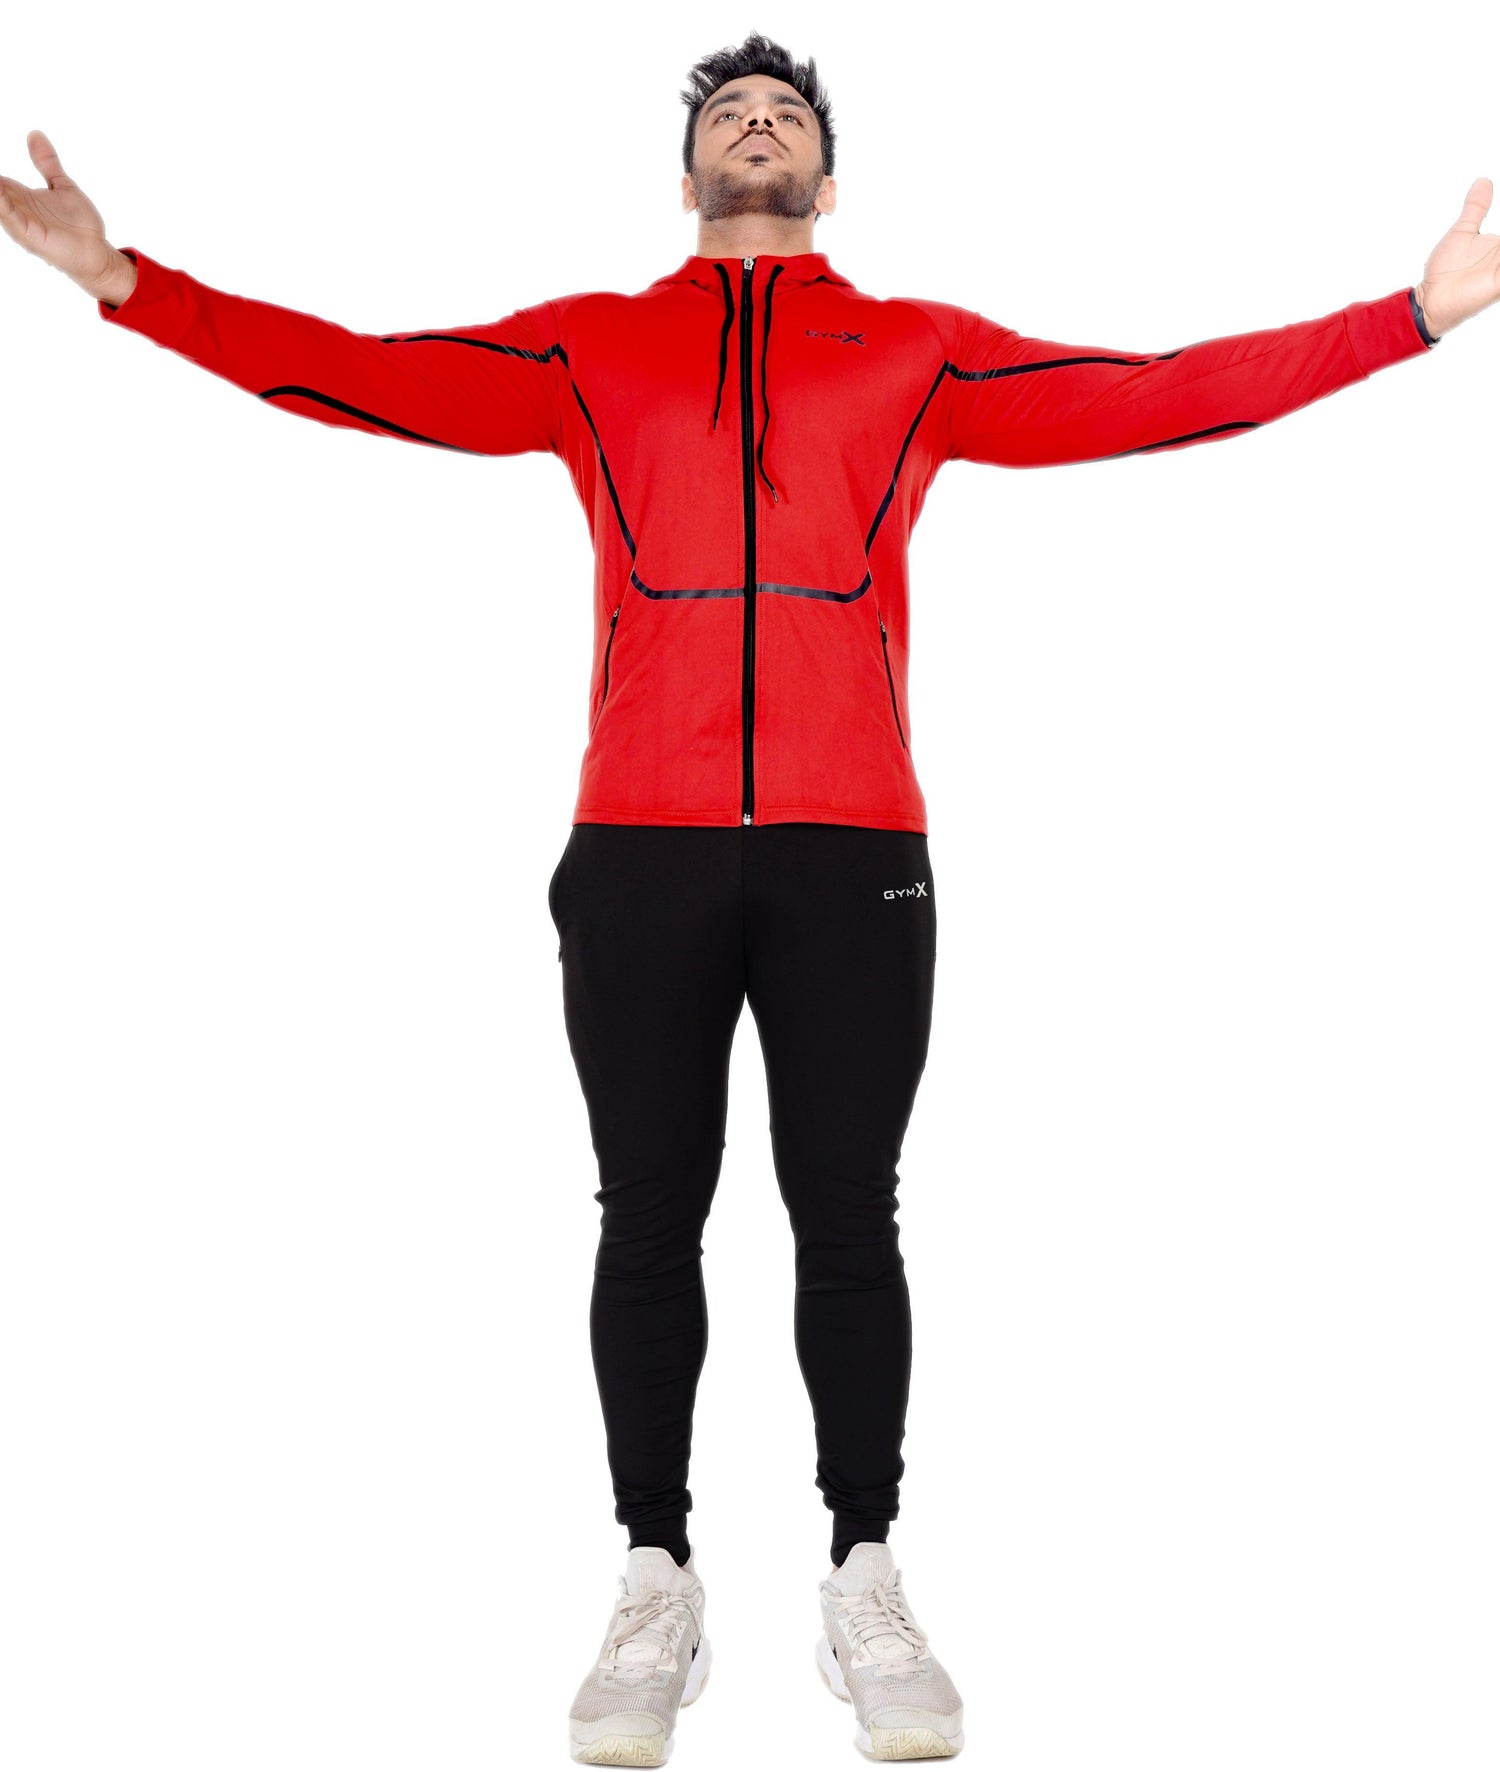 Emperor Red GymX Hoodie - Sale - GymX